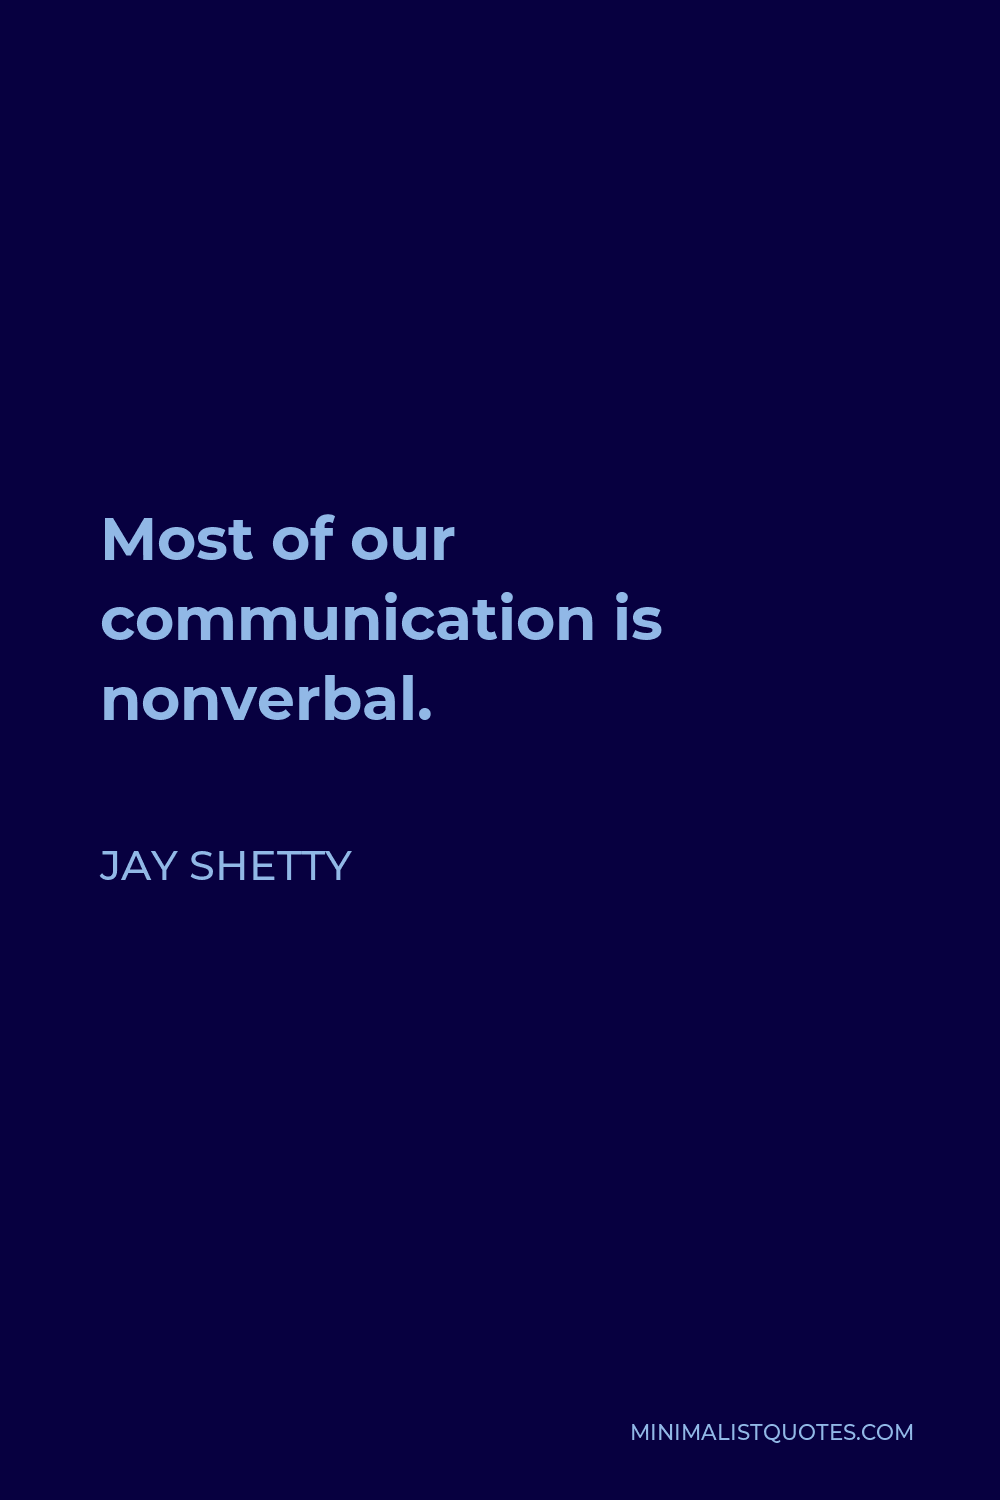 Jay Shetty Quote - Most of our communication is nonverbal.